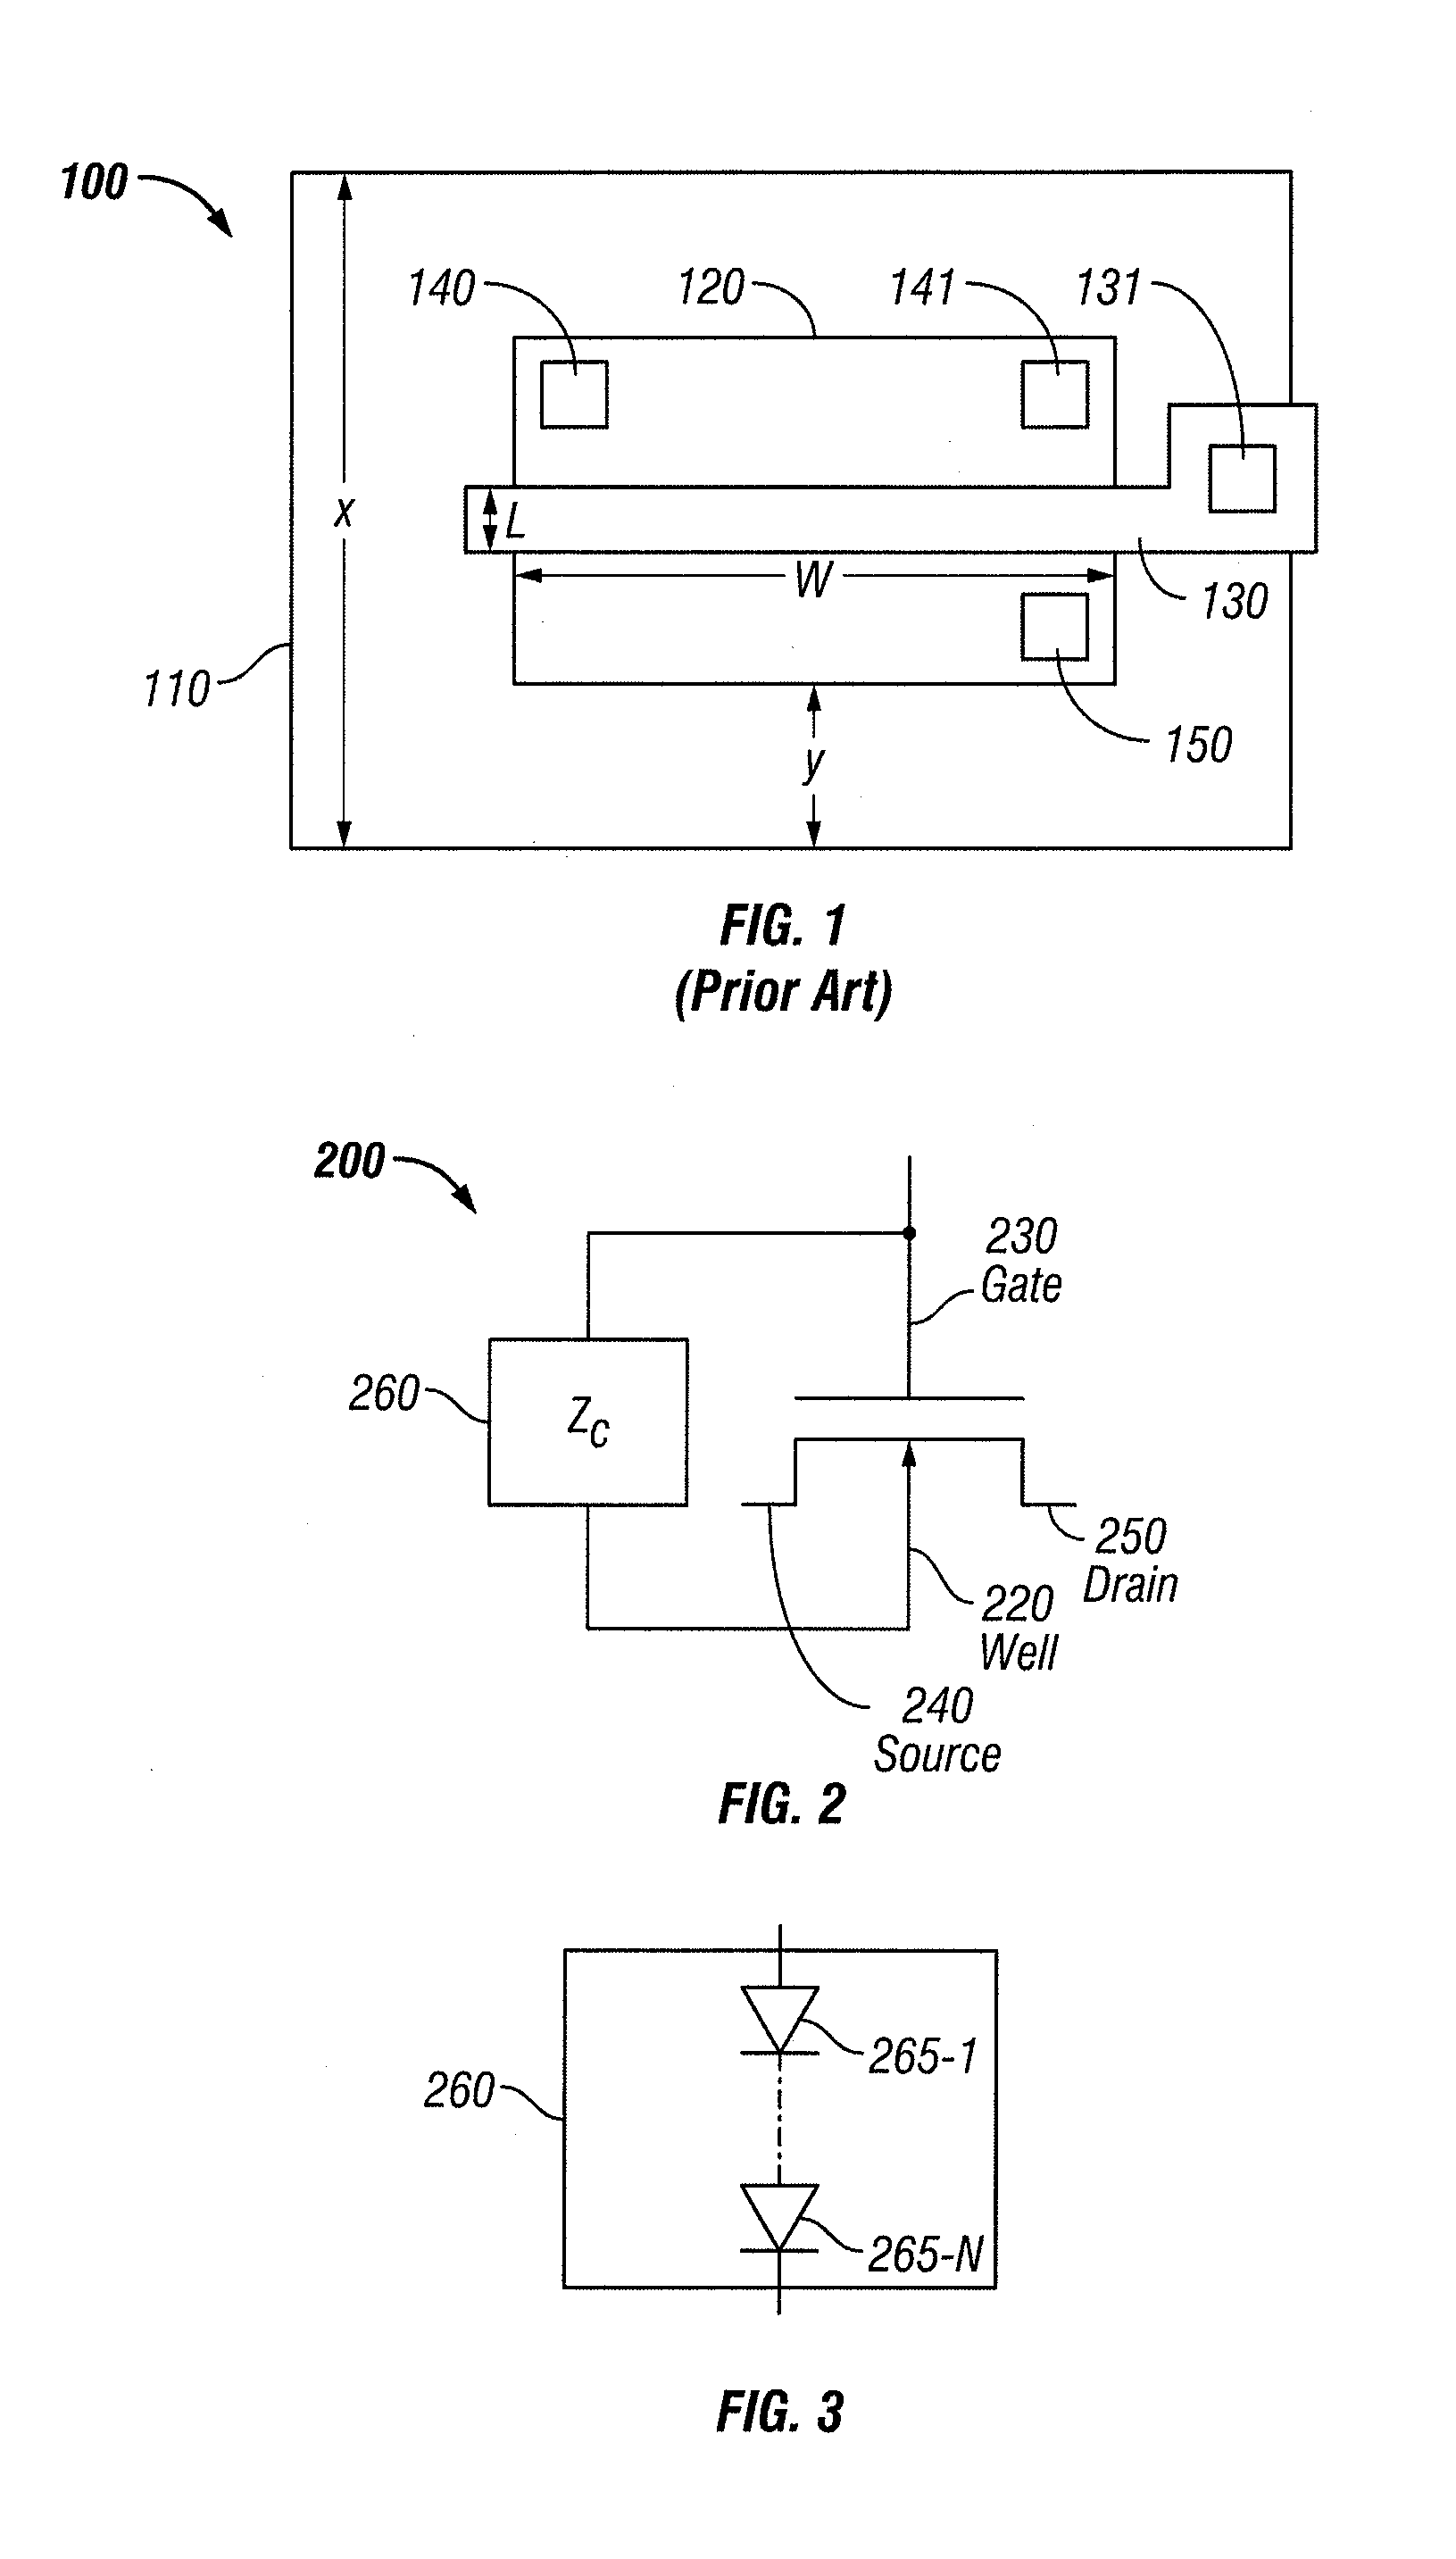 Apparatus and method for improving drive-strength and leakage of deep submicron MOS transistors